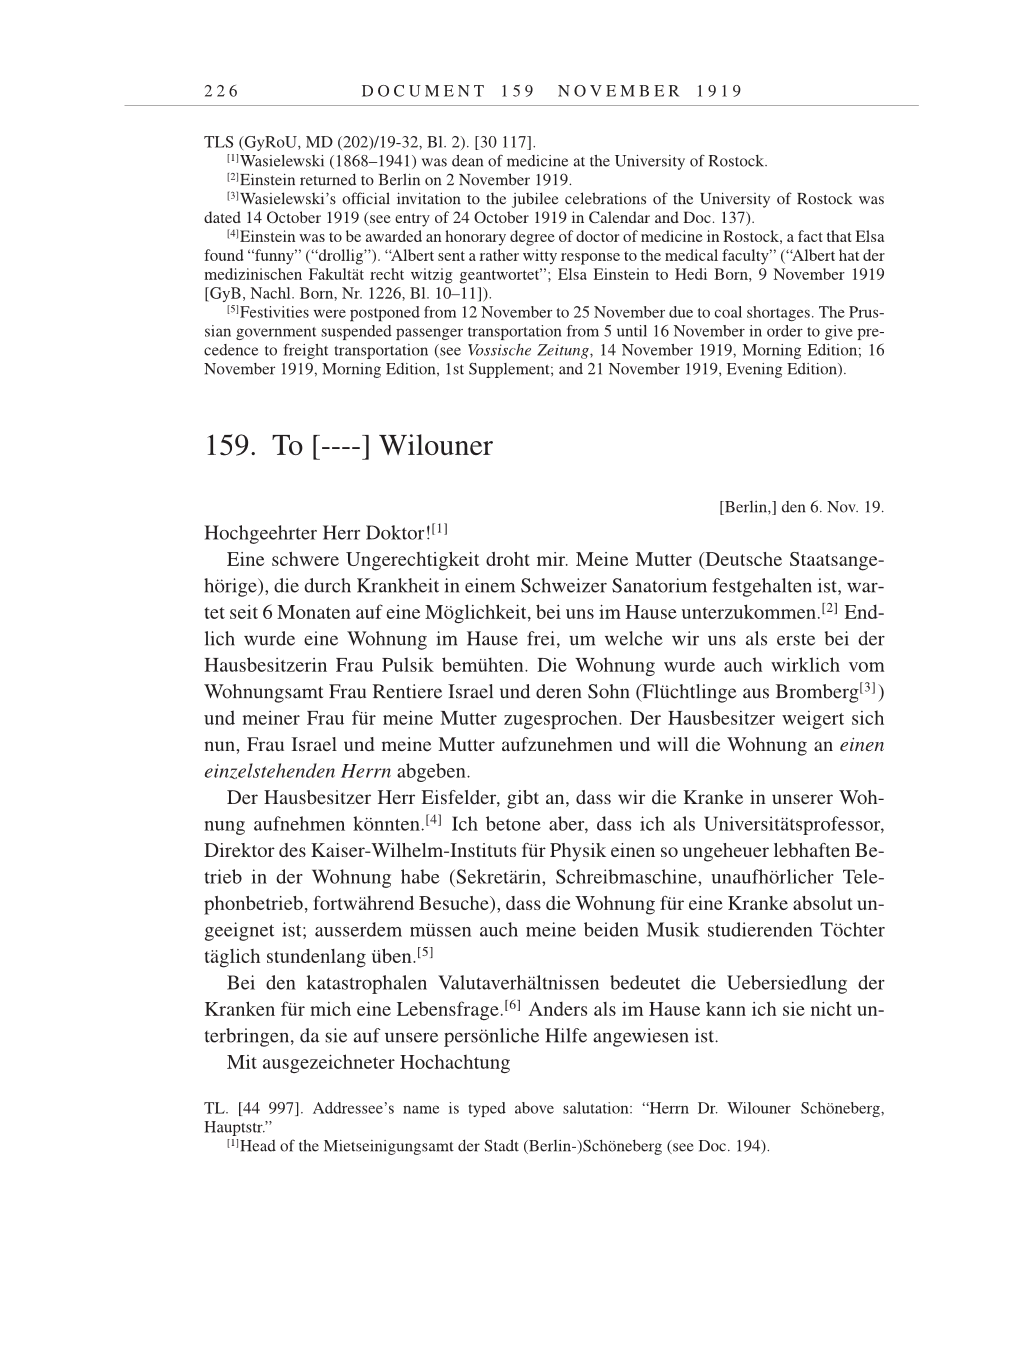 Volume 9: The Berlin Years: Correspondence January 1919-April 1920 page 226